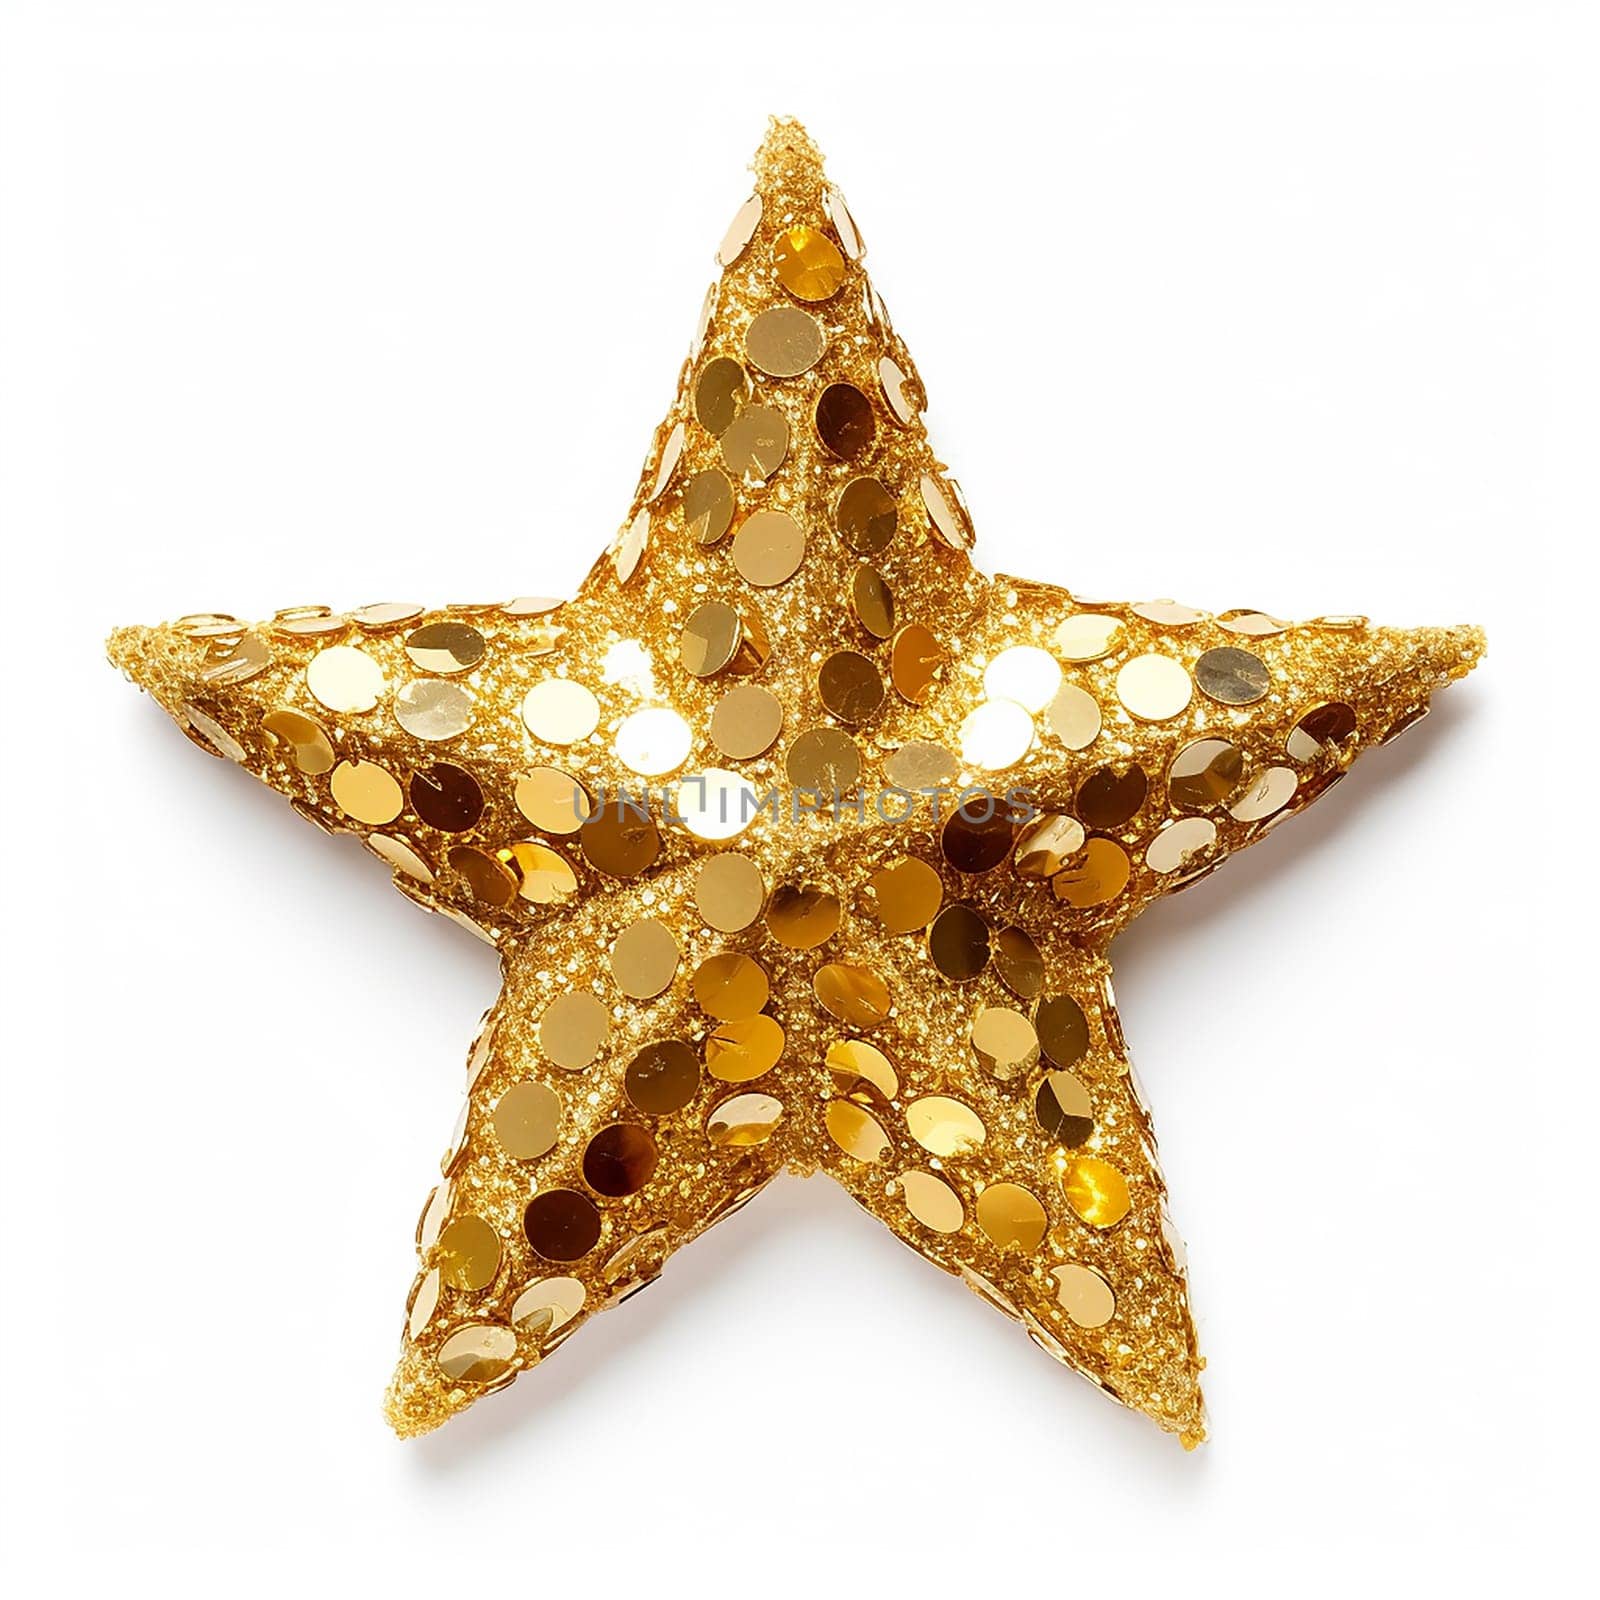 A glittering golden star with sequins isolated on white.